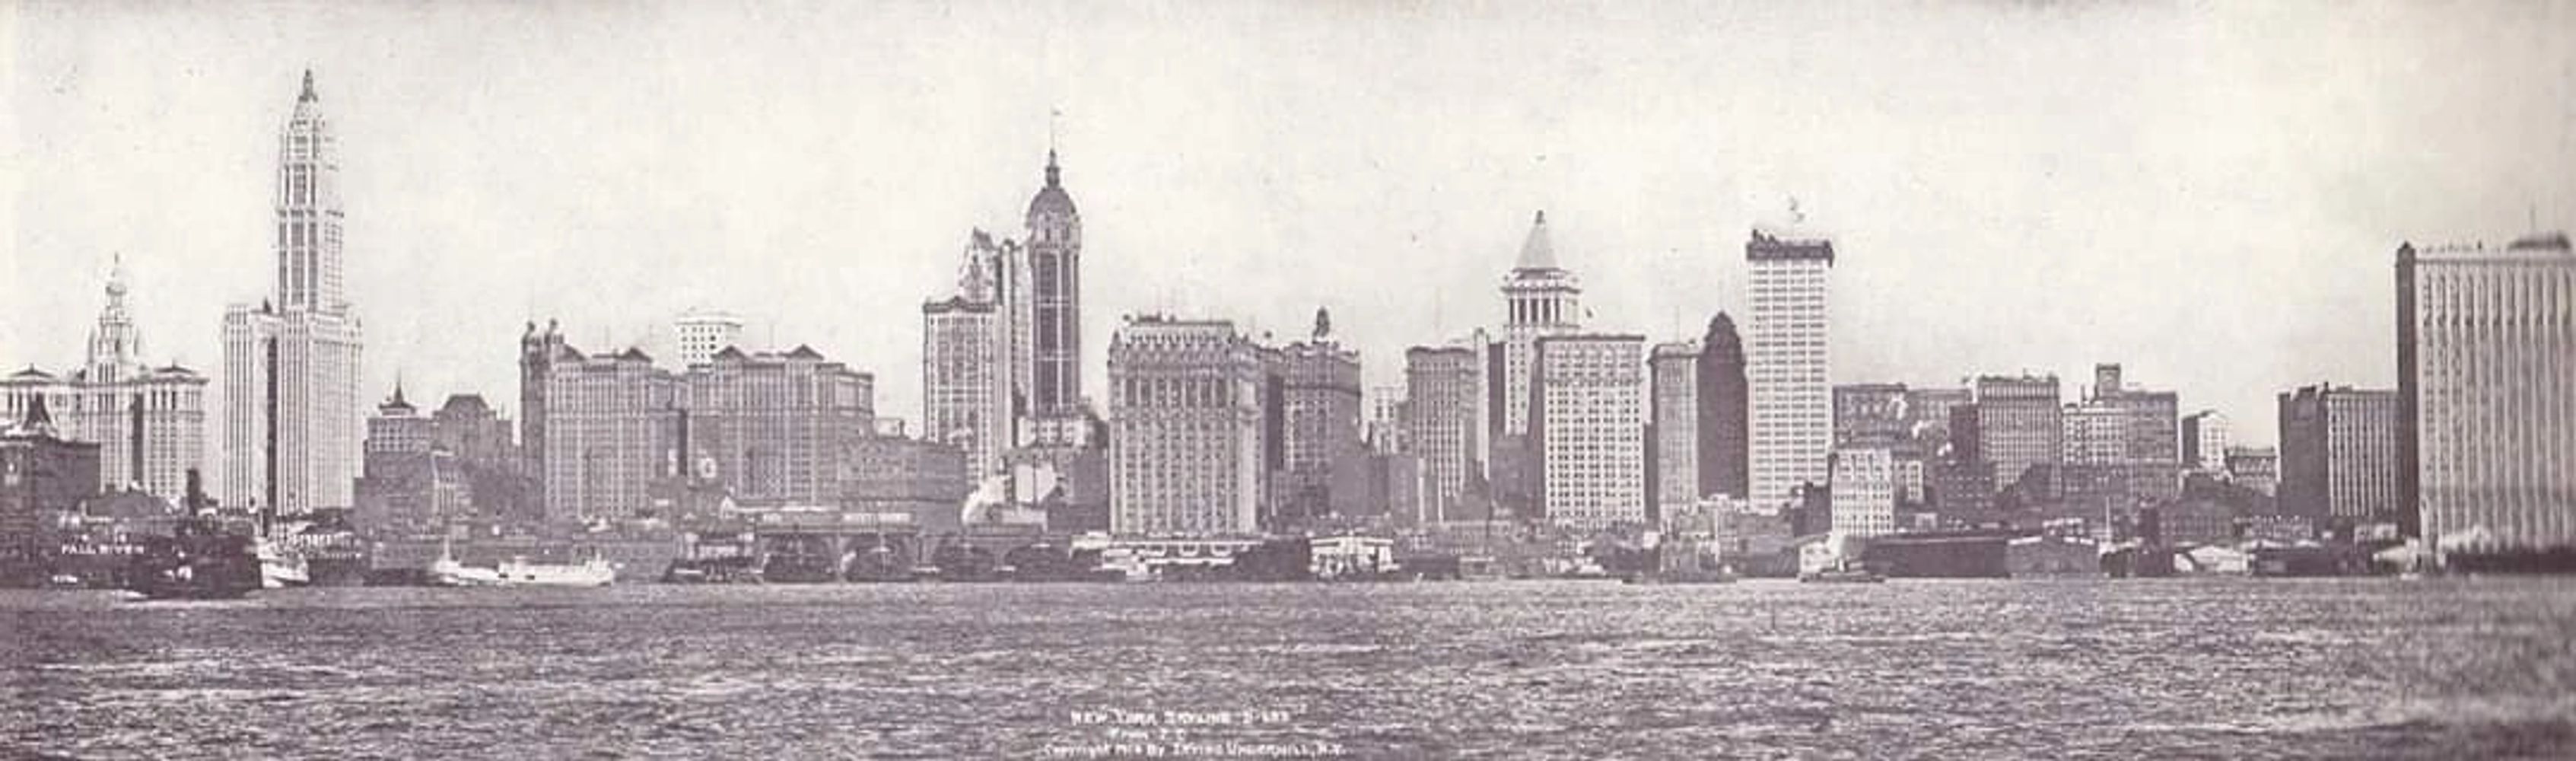 The skyline of lower Manhattan as it appeared circa 1914.